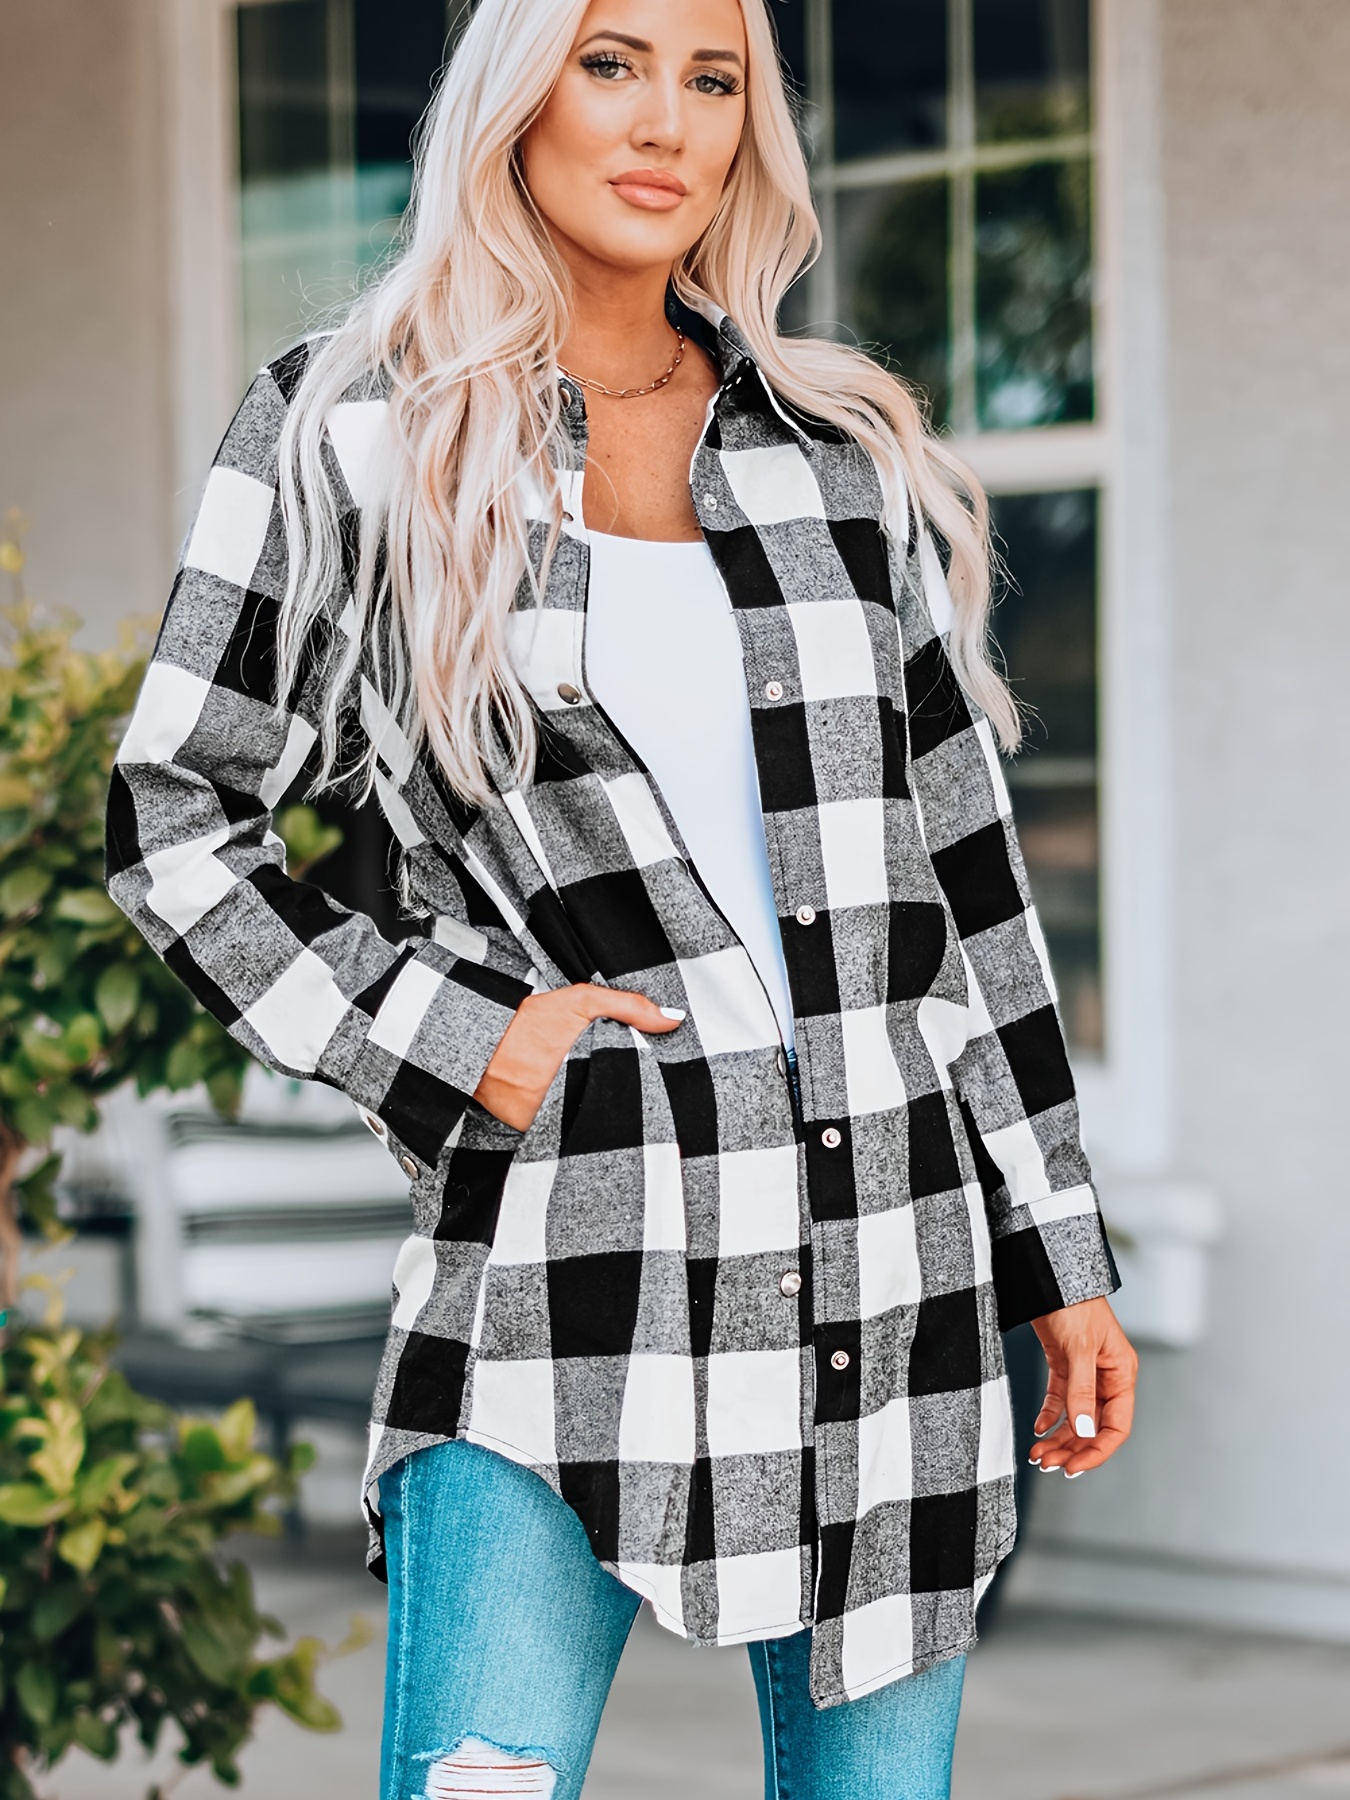 Fashion Trends  Plaid shirt outfits, Outfits with leggings, Plaid flannel  outfit